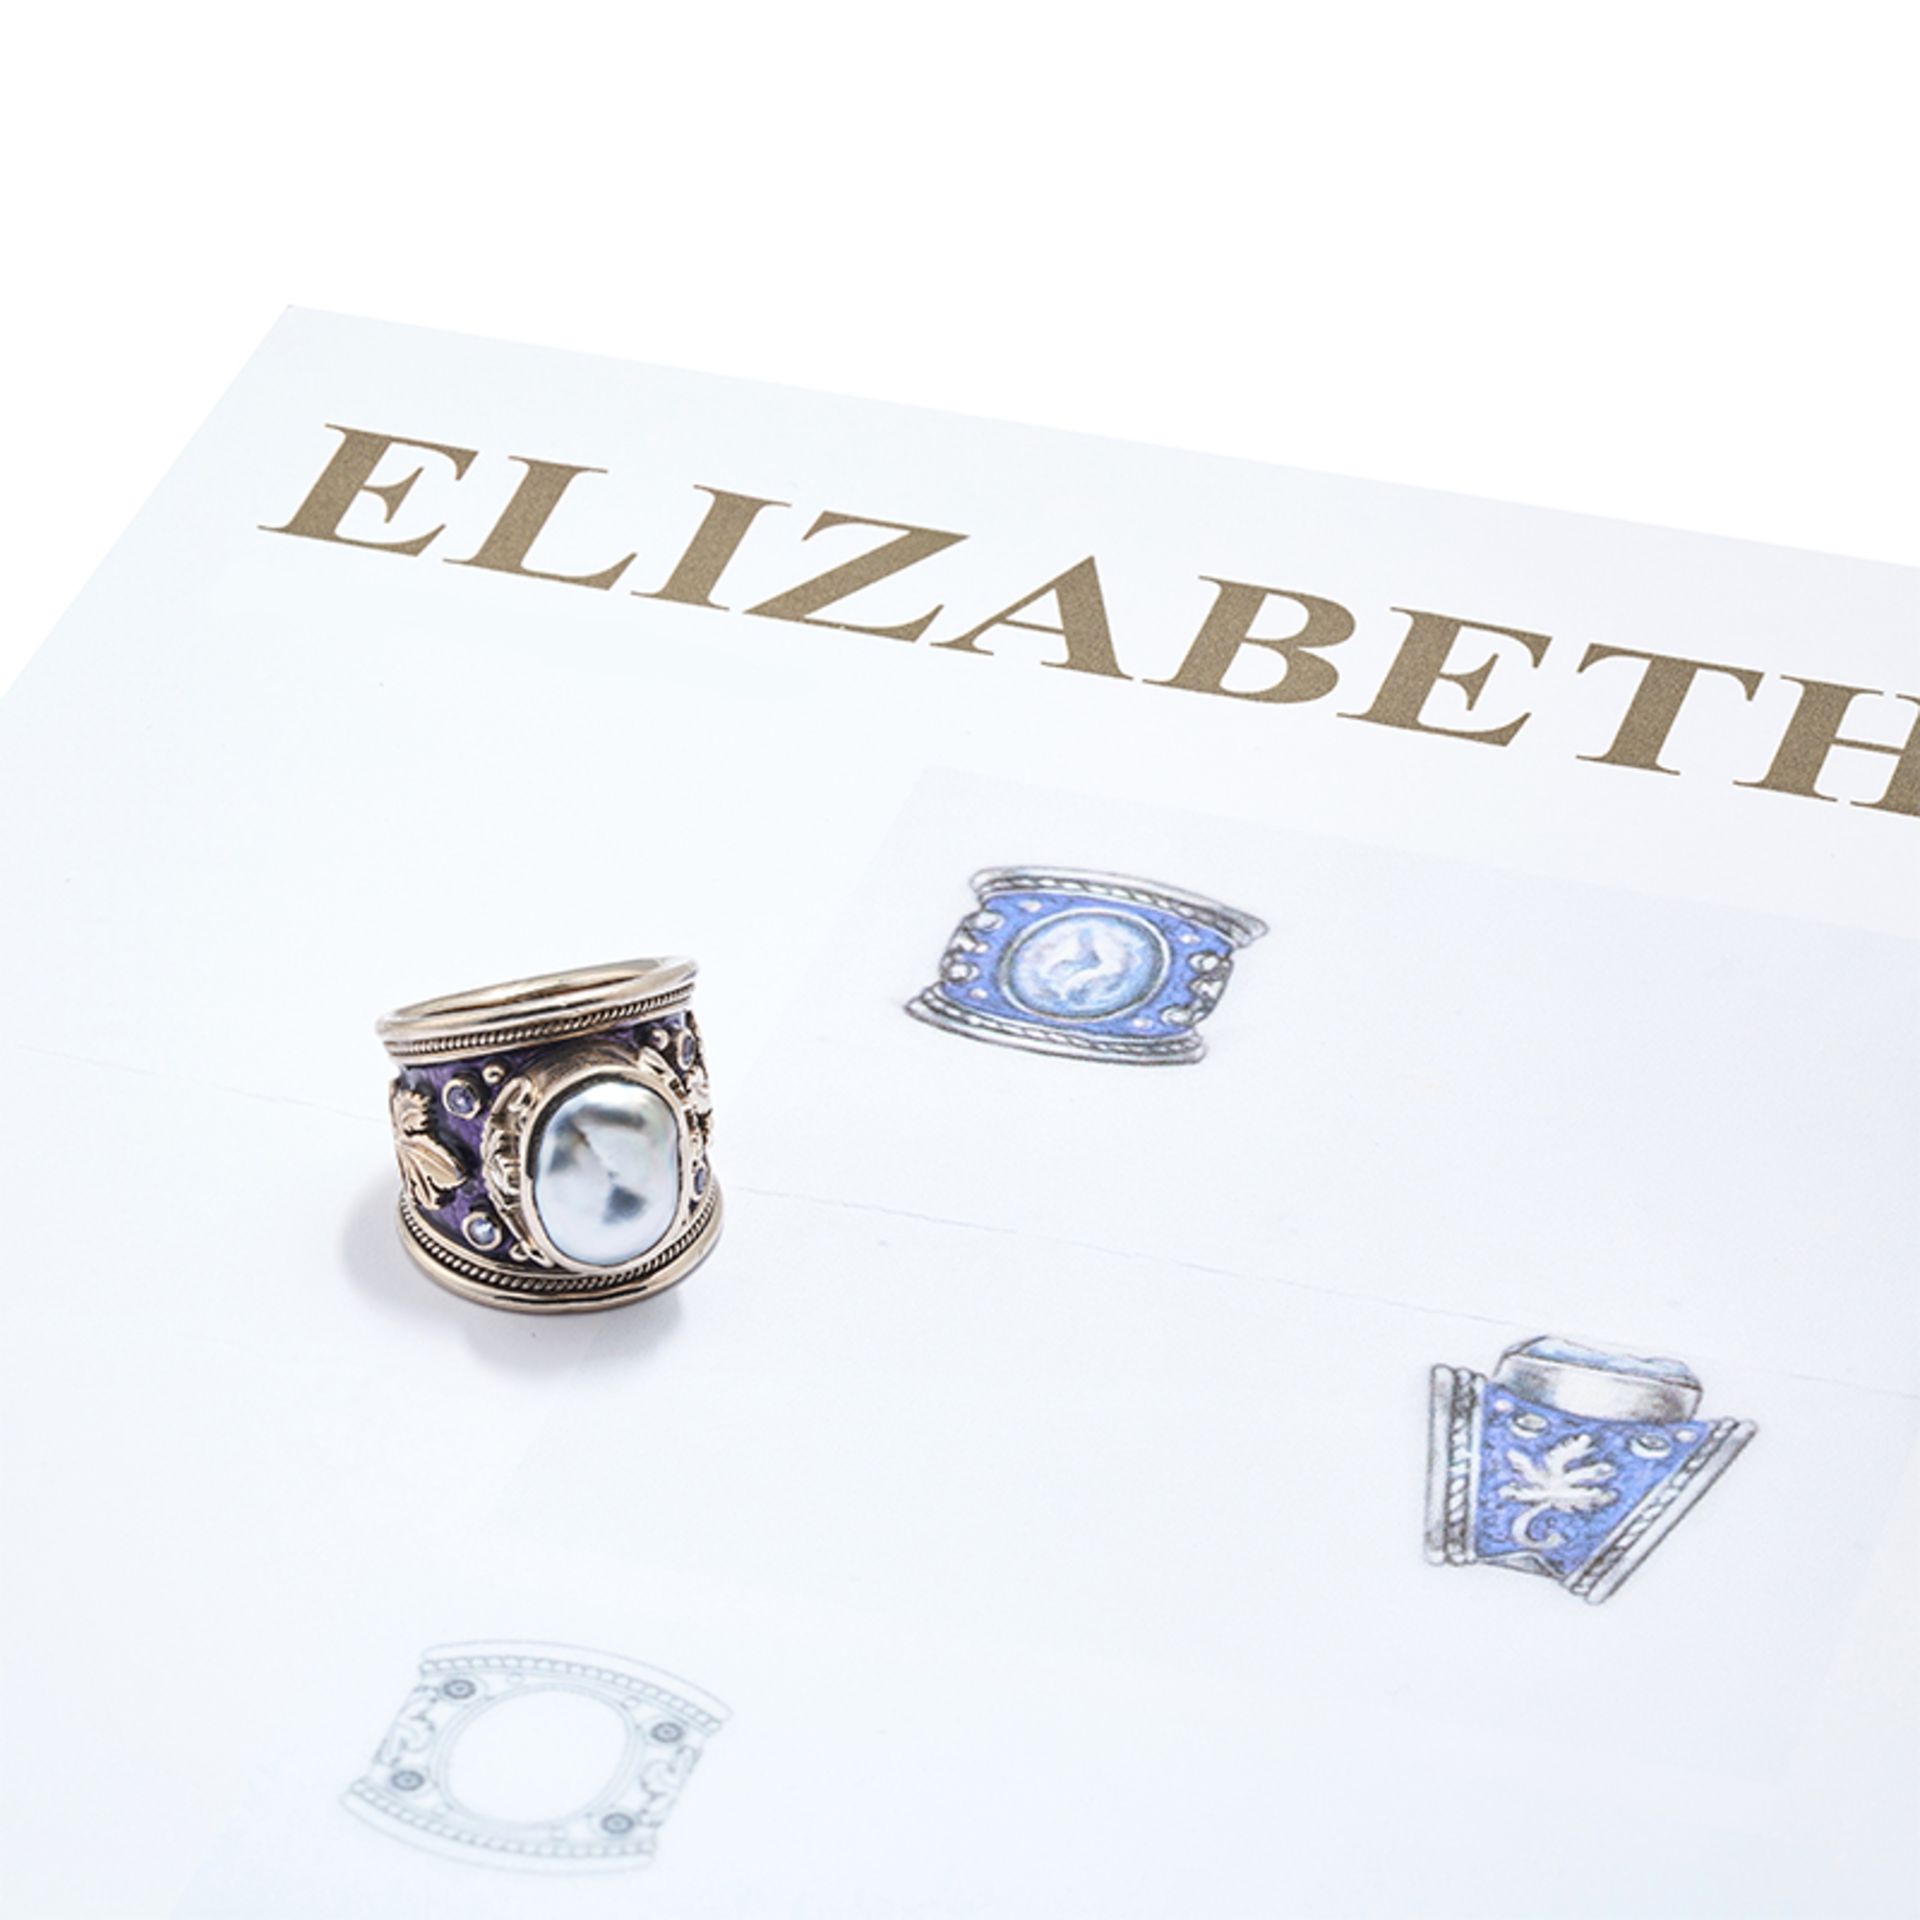 ELIZABETH GAGE, A KESHI PEARL, TANZANITE AND ENAMEL TEMPLAR RING in 18ct white gold, set with a k... - Image 3 of 5